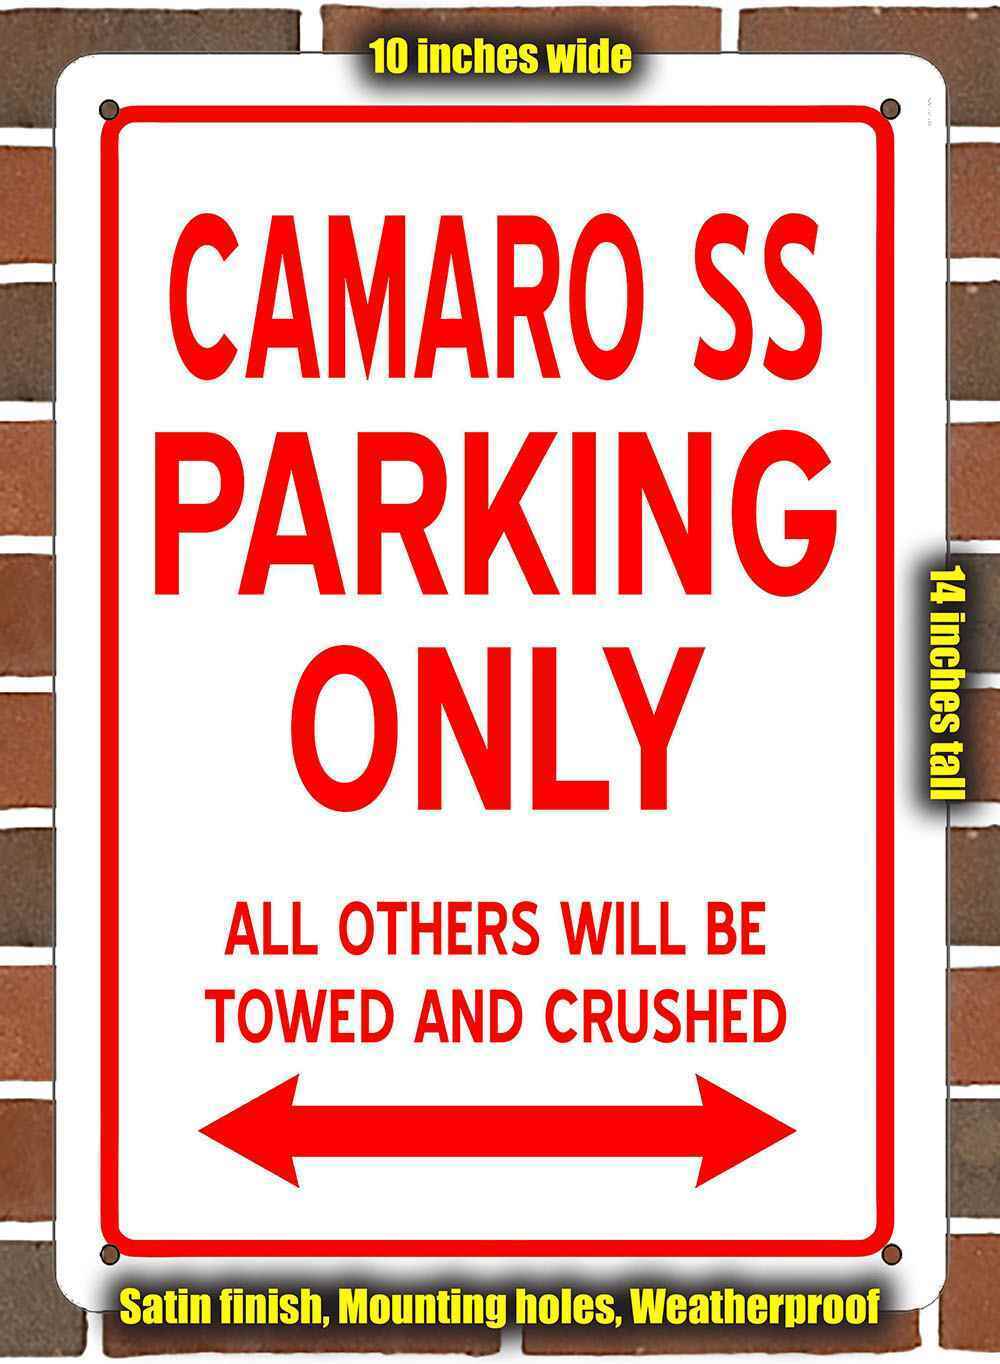 Metal Sign - CAMARO SS PARKING ONLY- 10x14 inches